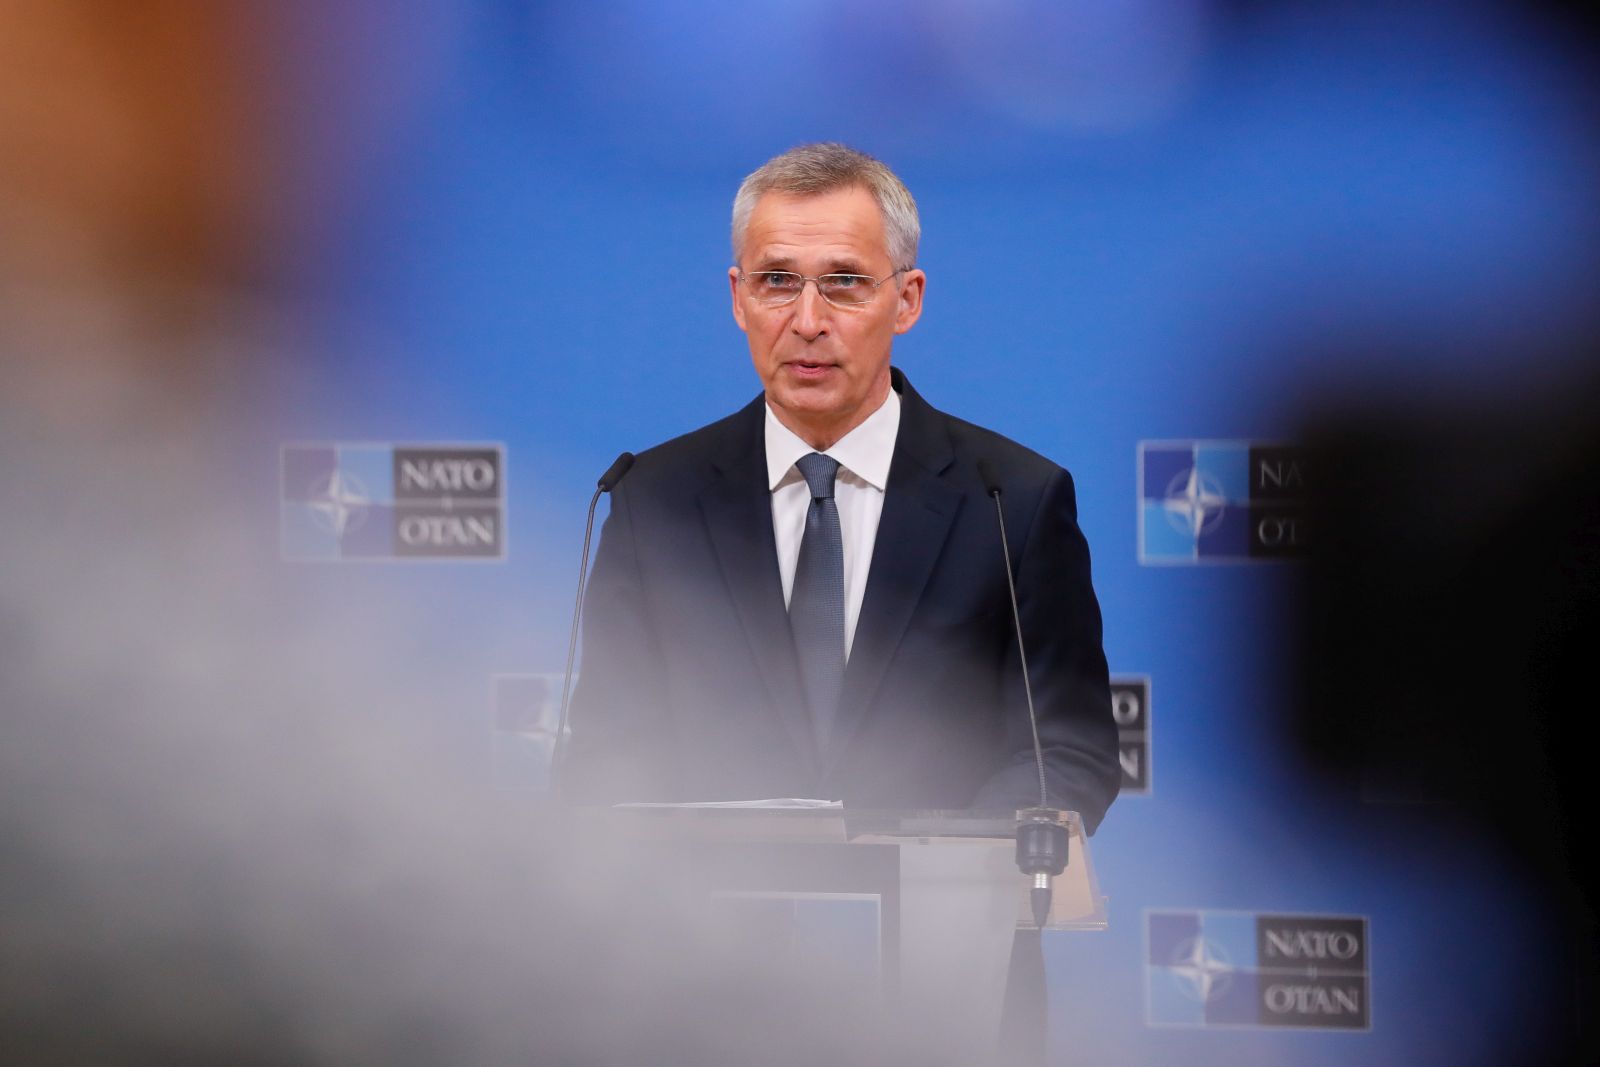 epa09871597 Secretary General of North Atlantic Treaty Organization (NATO) Jens Stoltenberg gives a press conference ahead of a two-day NATO Ministers of Foreign Affairs meeting on Ukraine at NATO headquarters in Brussels, Belgium, 05 April 2022. NATO Foreign Ministers will meet on 06 and 07 April.  EPA/STEPHANIE LECOCQ